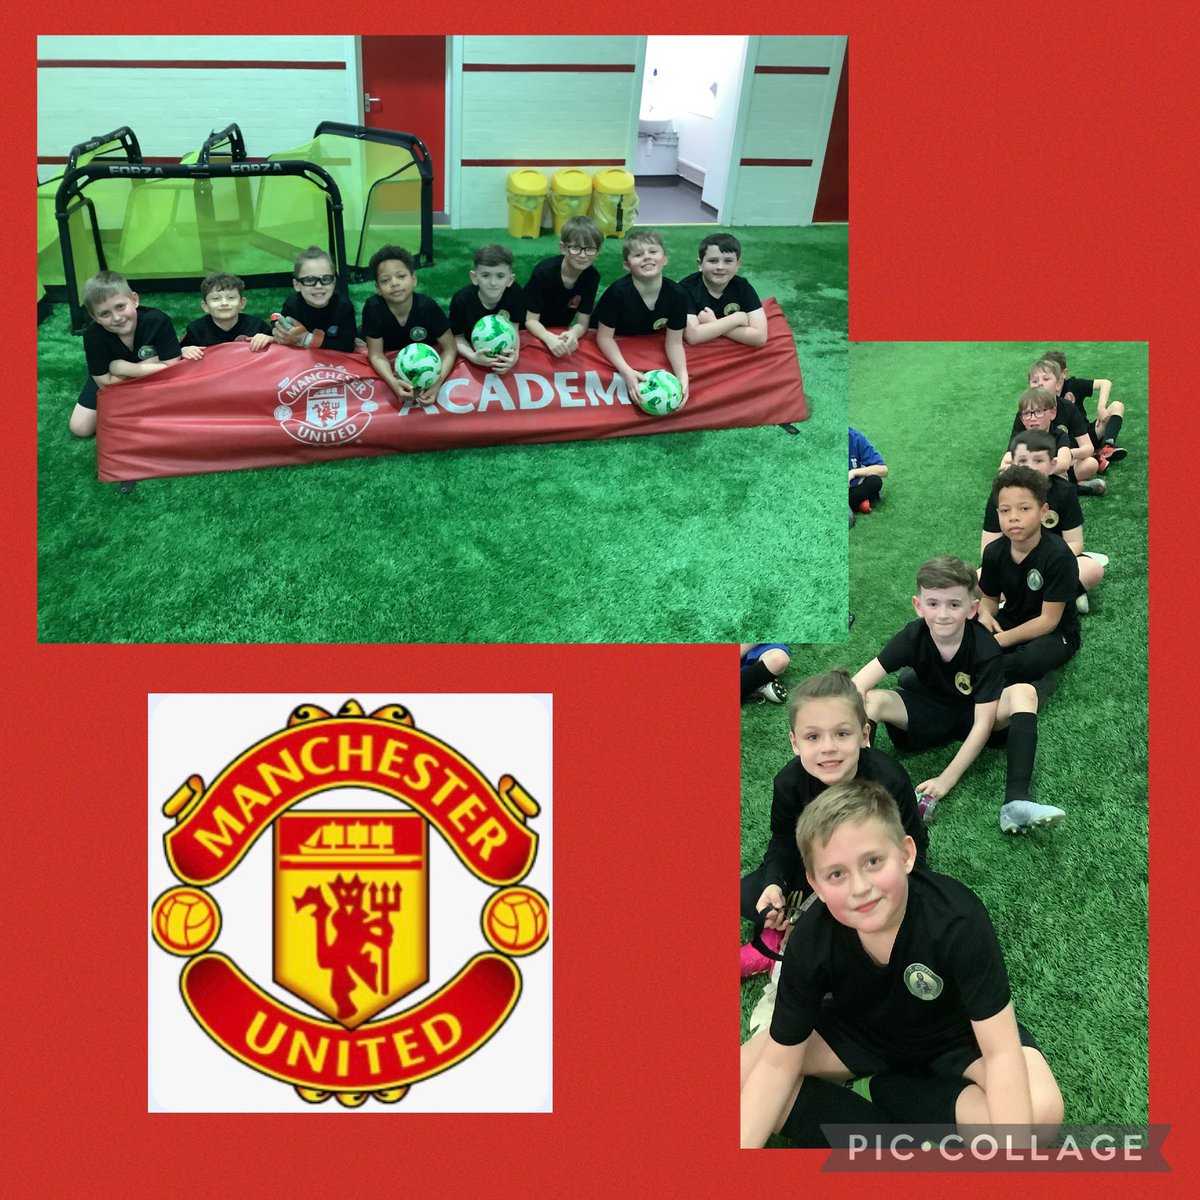 Yesterday, 8 boys from Year 4 played in a tournament at Manchester United training ground against 6 other schools. Although we were not winners this time, the children had the best time and showed excellent sportsmanship! ⚽️ #sjsbPE